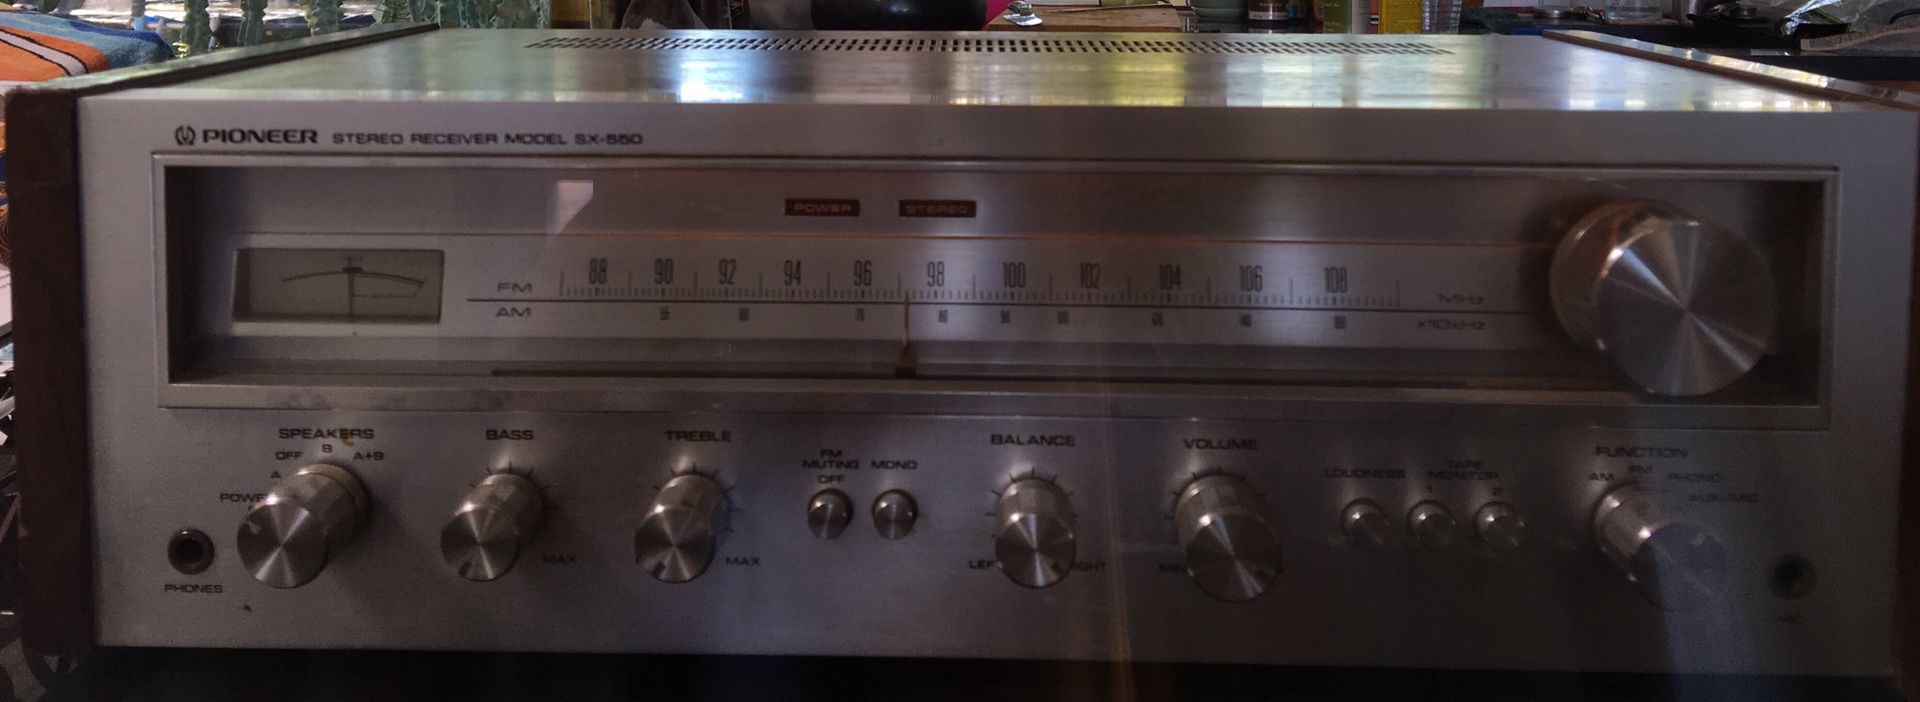 1970s PIONEER SX-550 STEREO RECEIVER